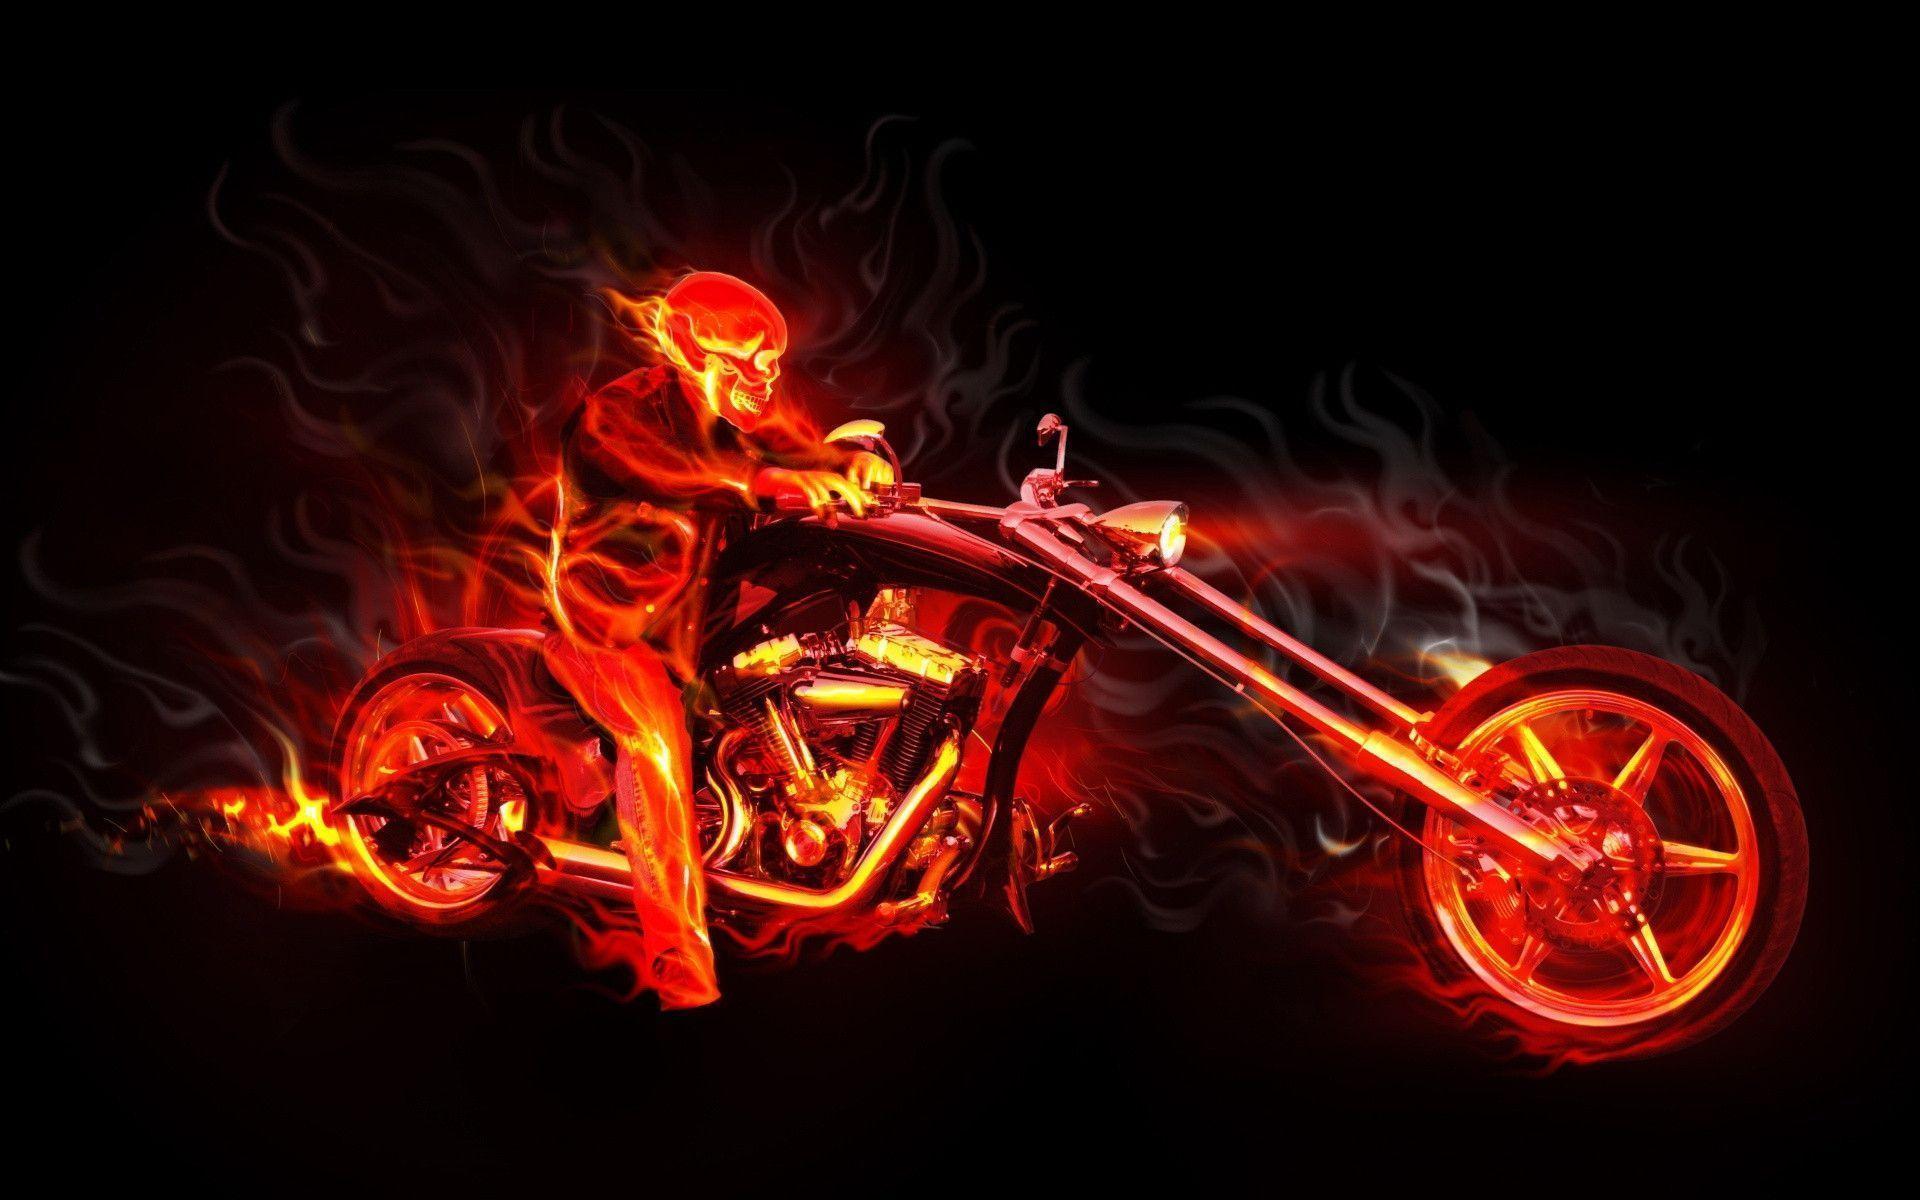 amazing motorcycle rider background 306157 Image HD Wallpaper